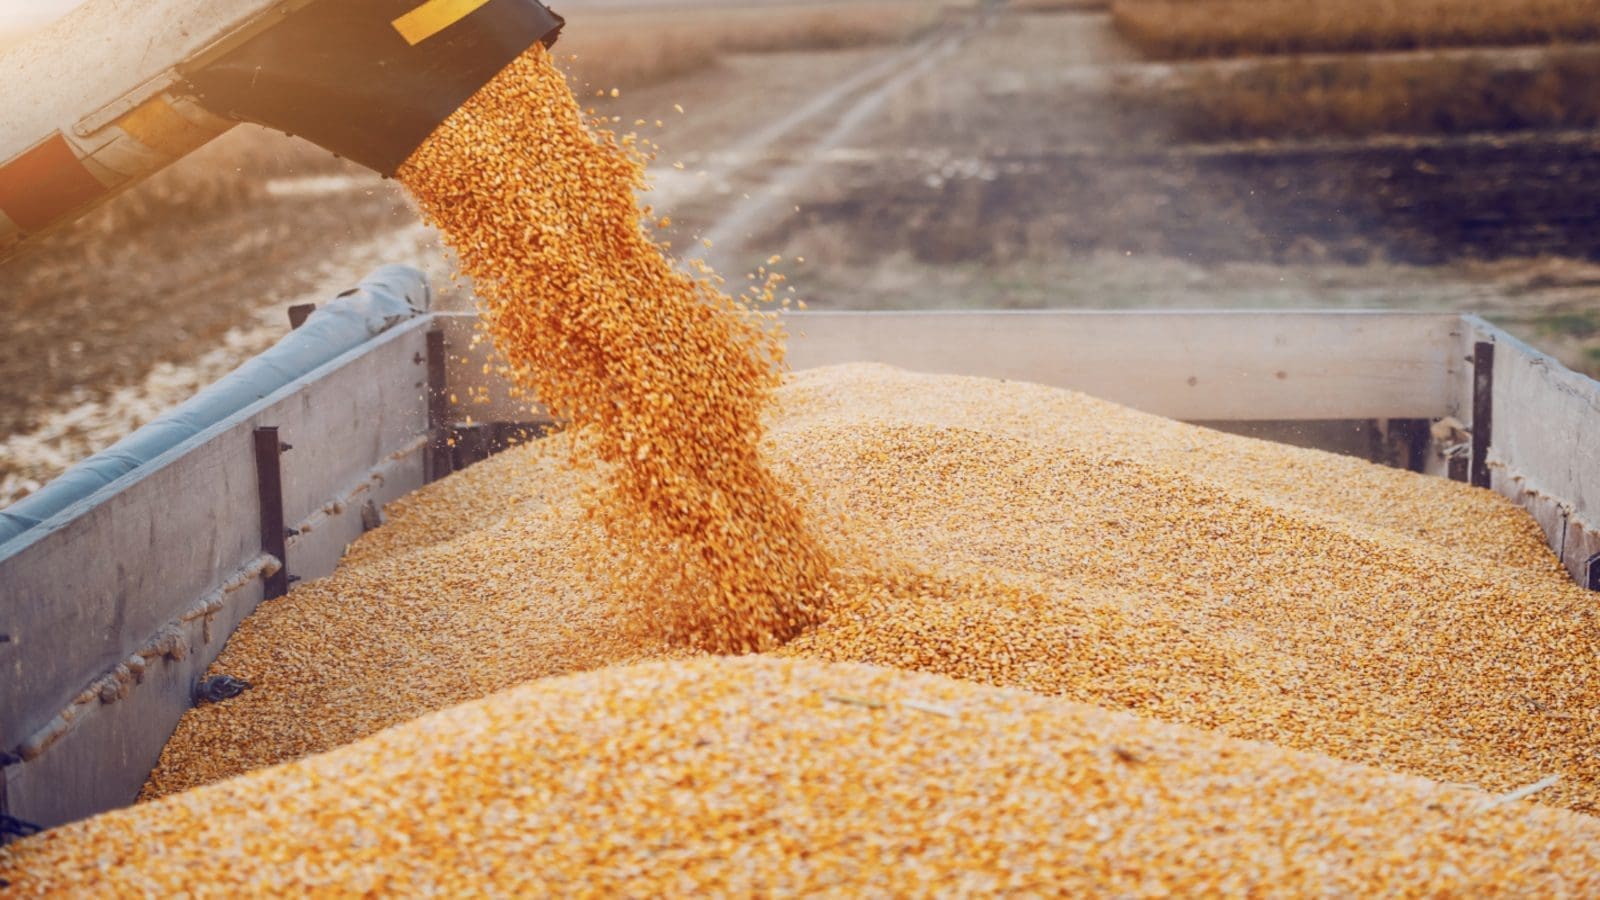 South Korea to ramp up corn imports to meet anticipated surge in demand